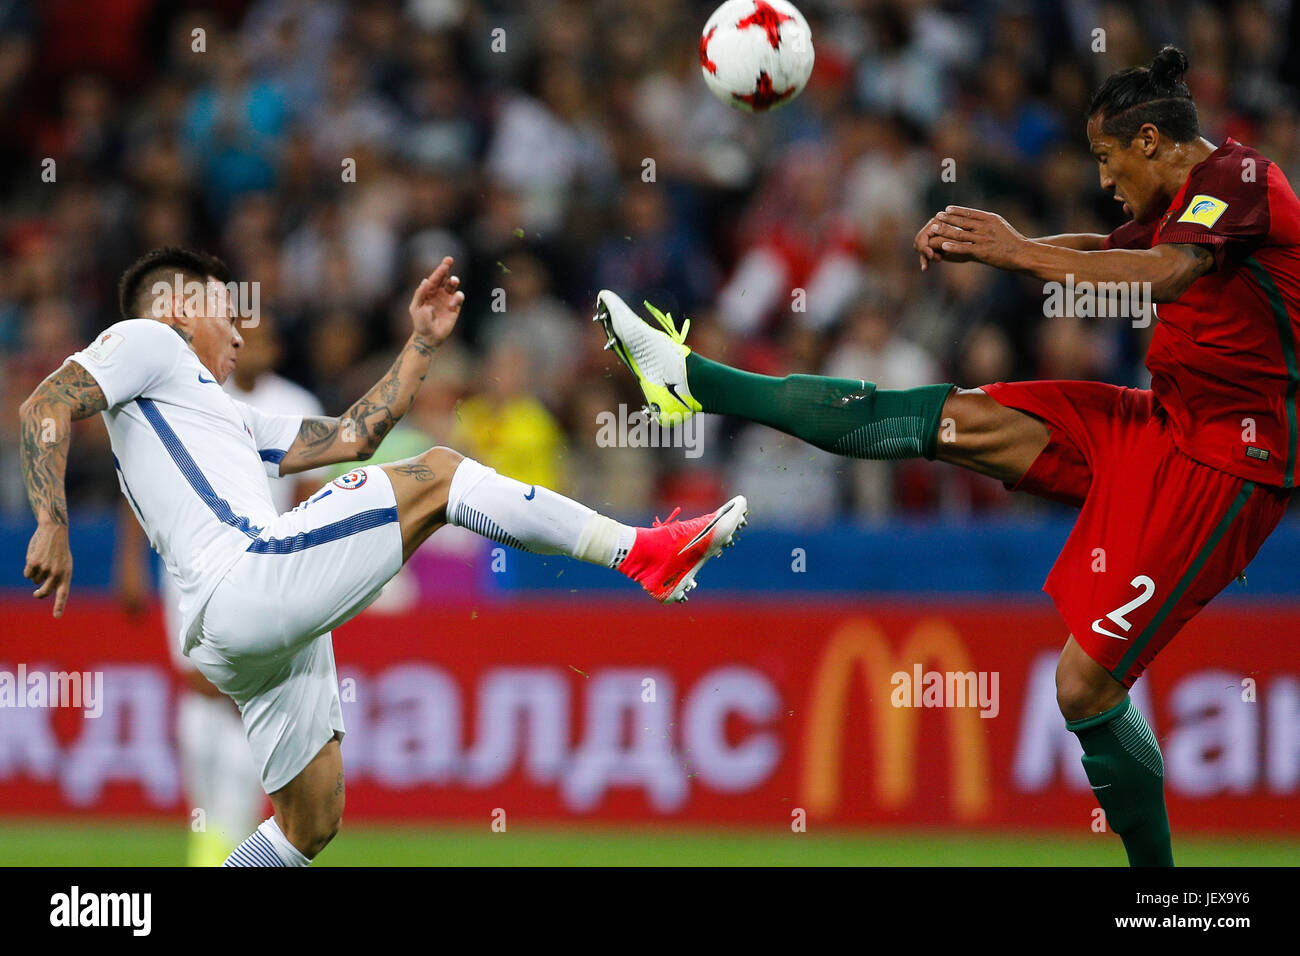 KAZAN, RT - 28.06.2017: PORTUGAL VS CHILE - VARGAS Eduardo of Chile plays the ball with BRUNO ALVES of Portugal during a match between Portugal and Chile, valid for the semifinals of the 2017 Confederations Cup, on Wednesday (28th), held at the Kazan Arena in Kazan, Russia. (Photo: Marcelo Machado de Melo/Fotoarena) Stock Photo